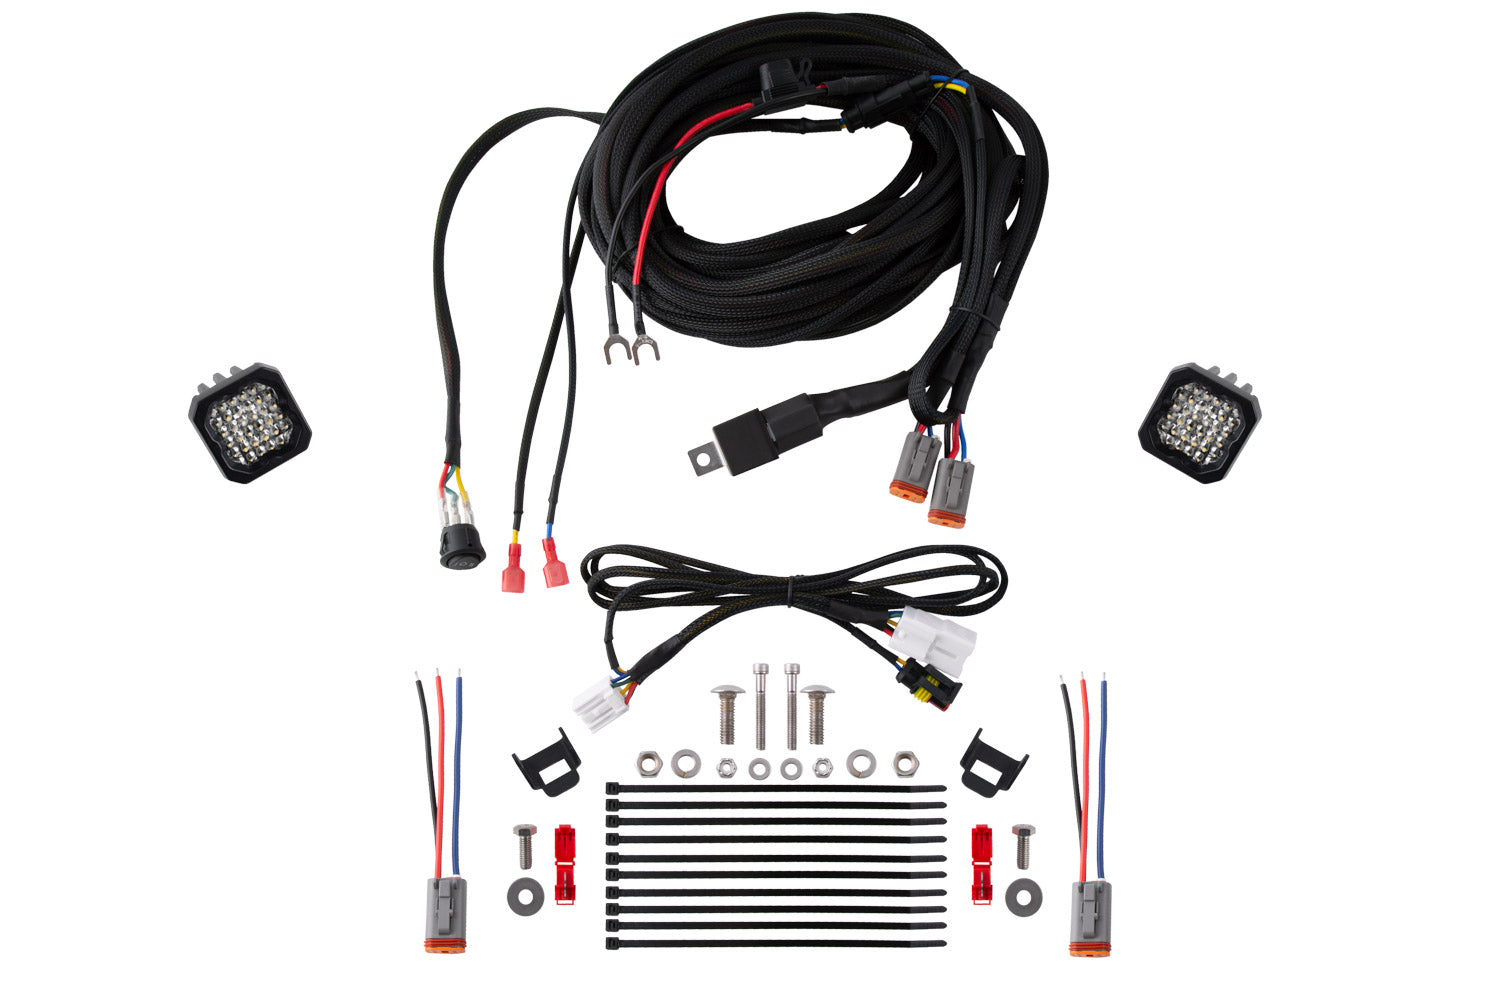 Stage Series Reverse Light Kit for 2010-2021 Toyota 4Runner, C1 Pro Diode Dynamics